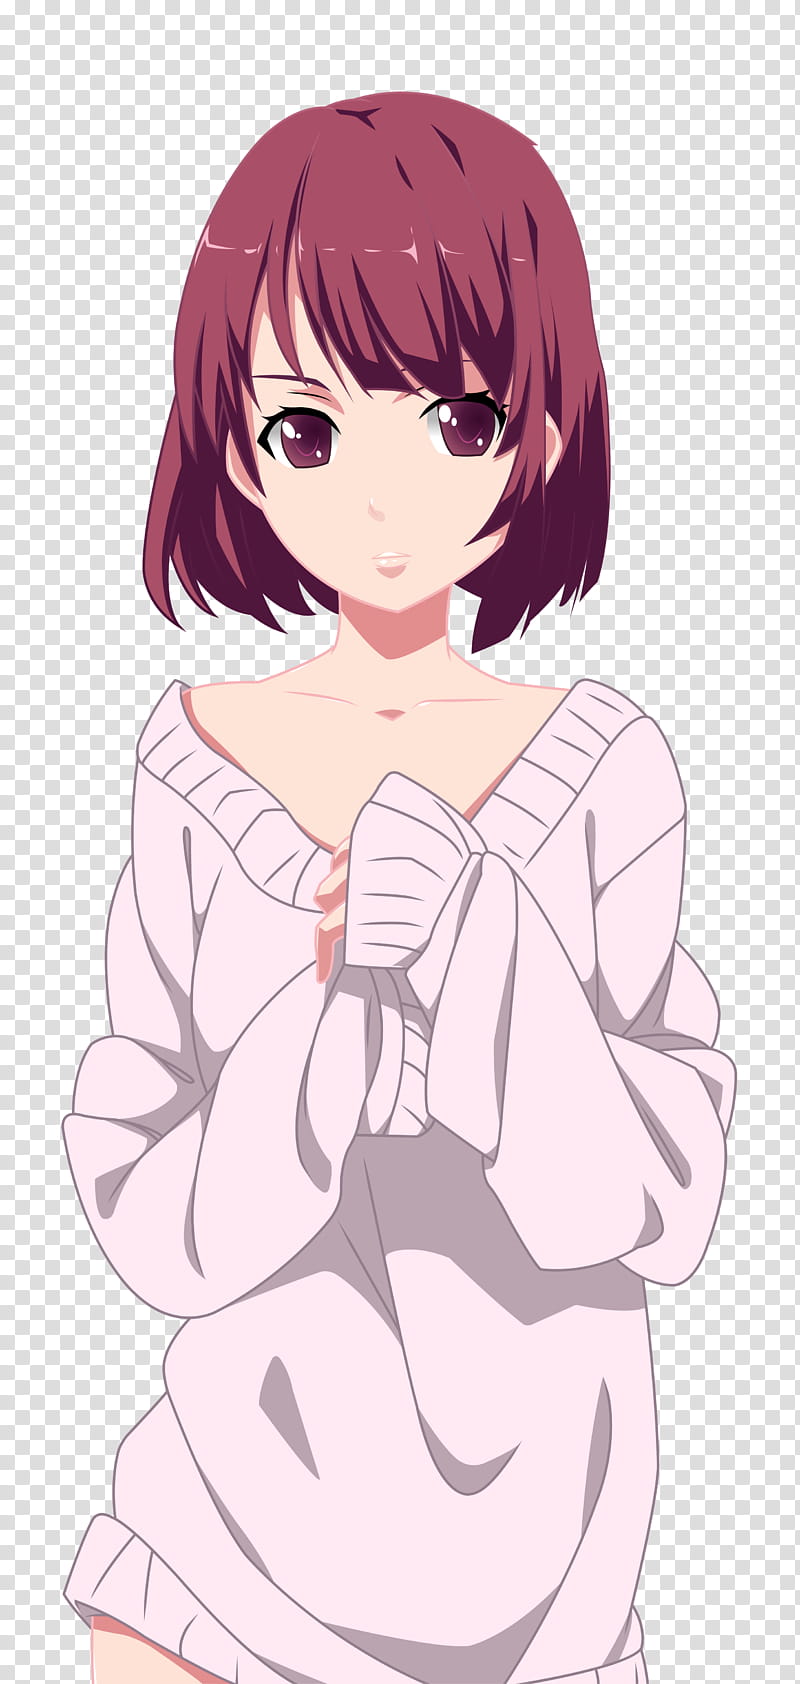 Anime Girl UPDATE , maroon-haired woman in white long-sleeved shirt anime character illustration transparent background PNG clipart